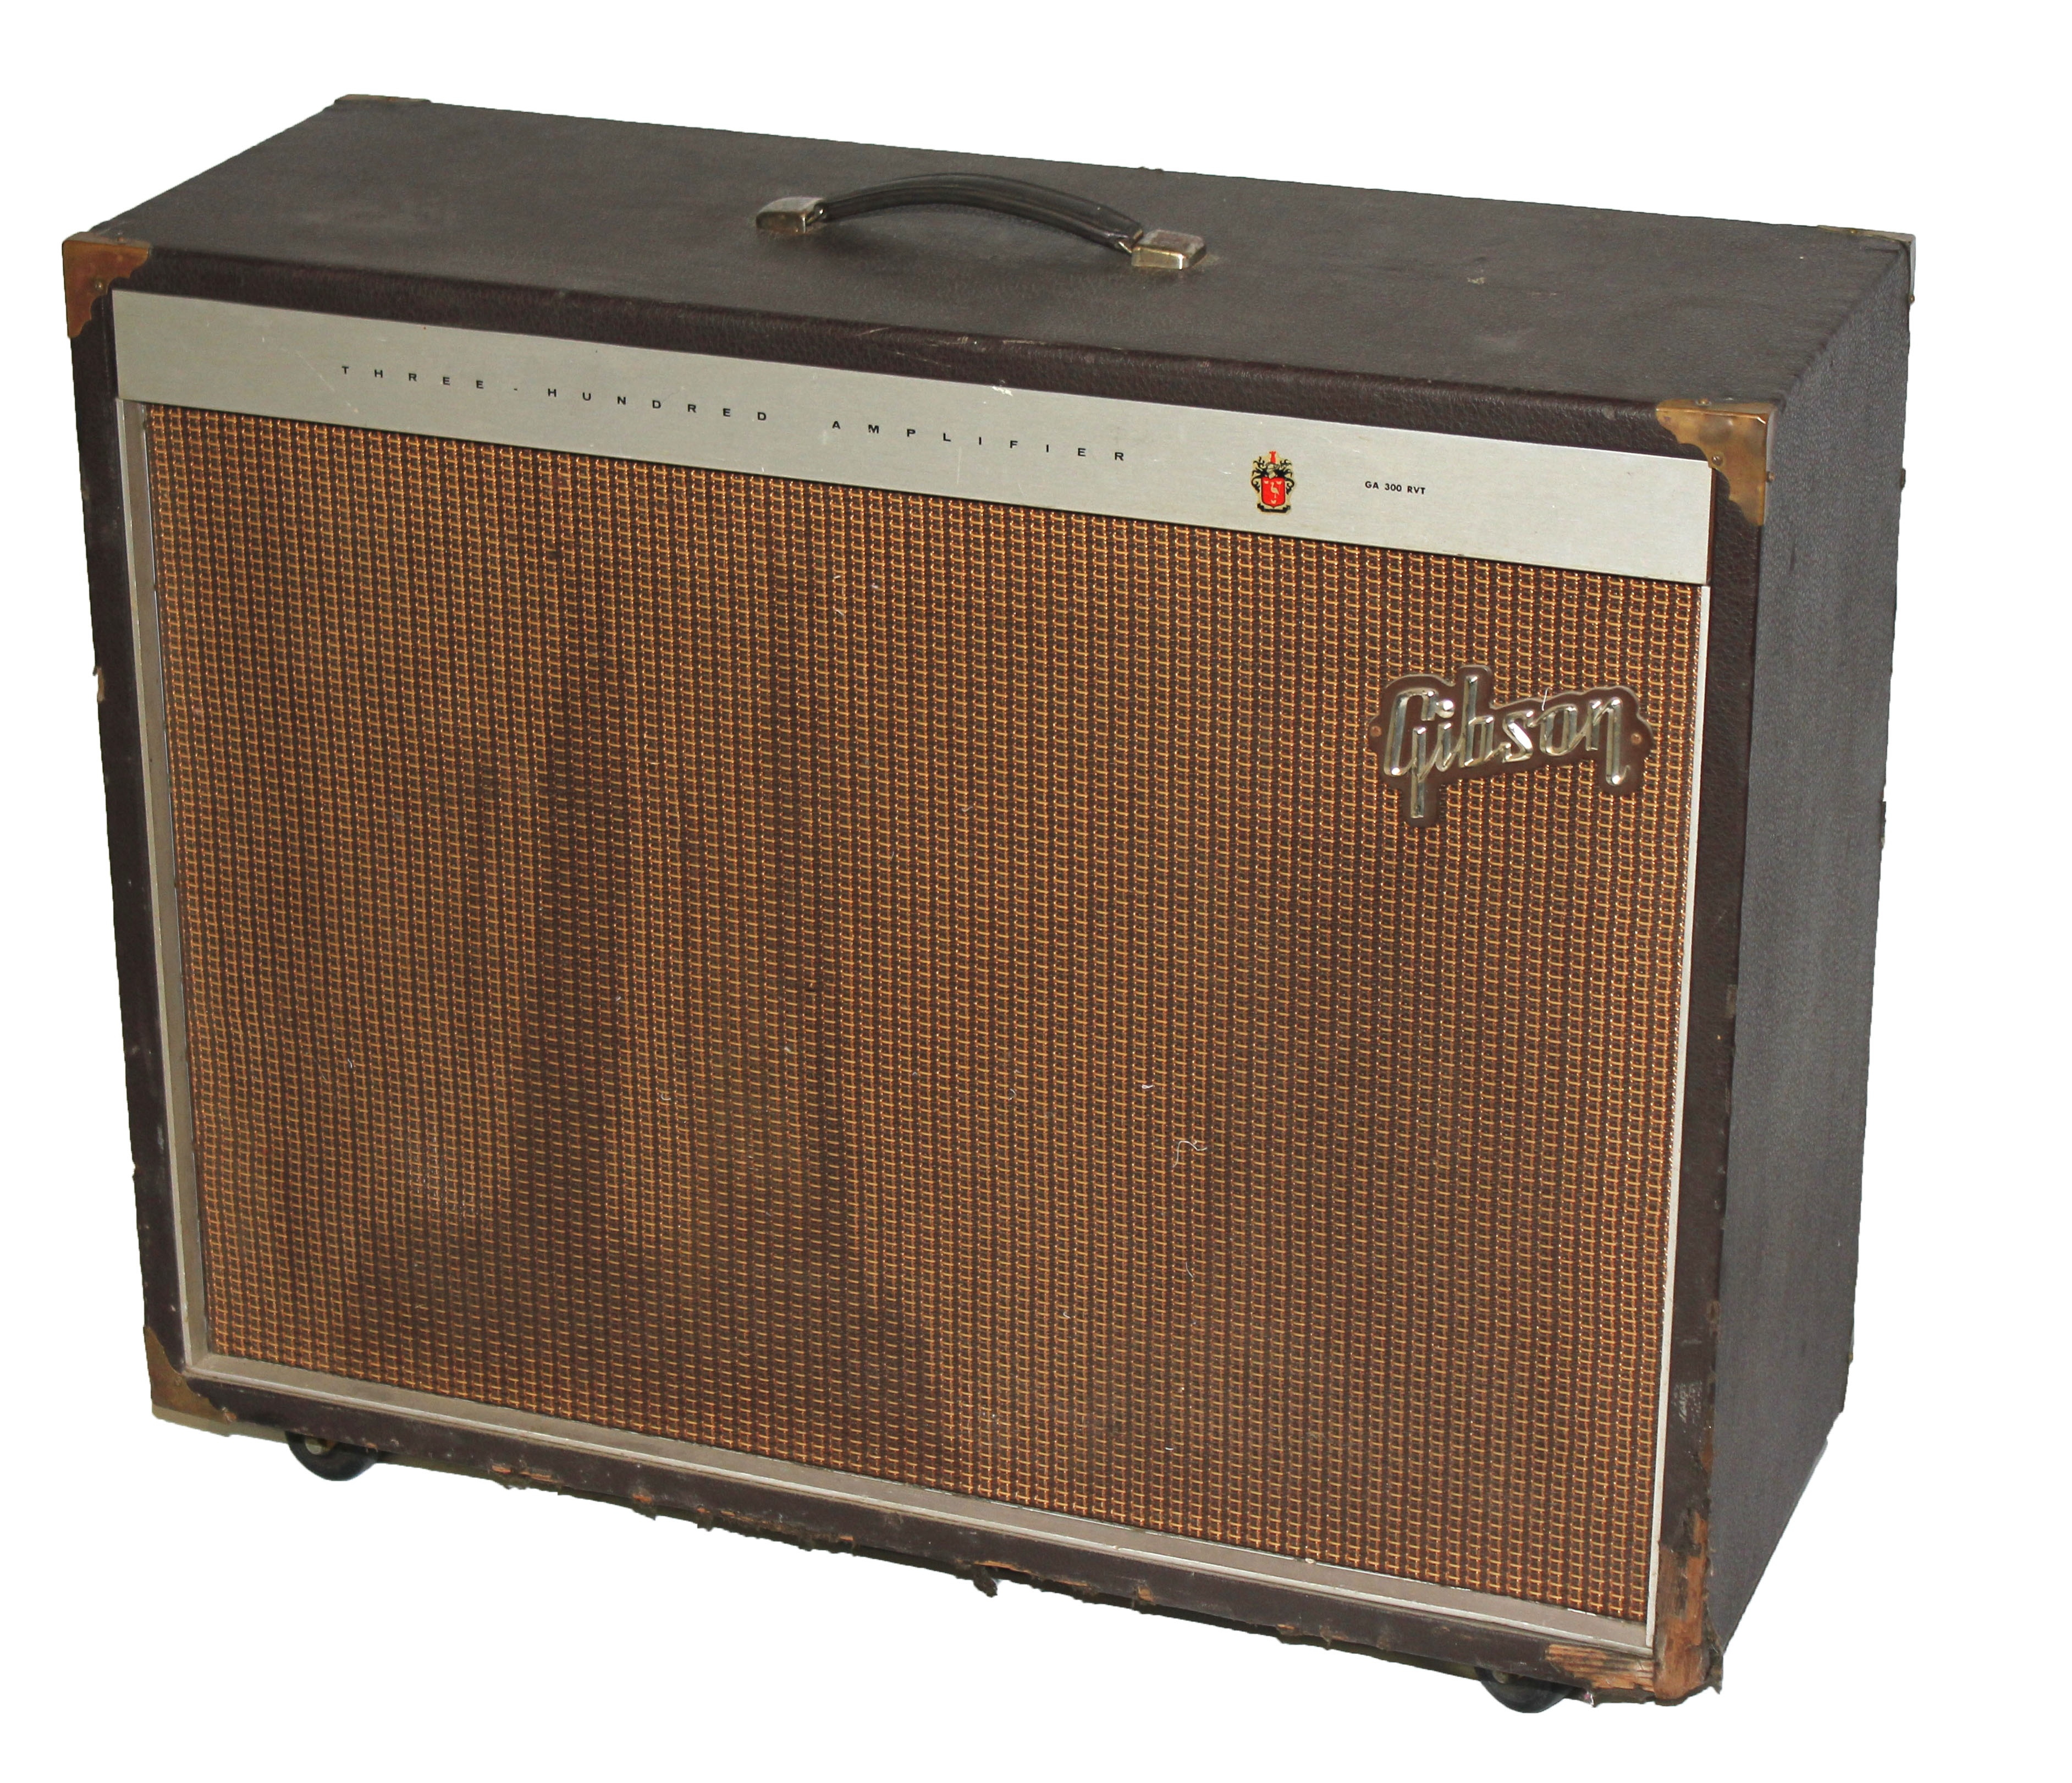 A GIBSON GA 300 RVT CREDTLINE TUCKAWAY AMP Made only 1962/1963.